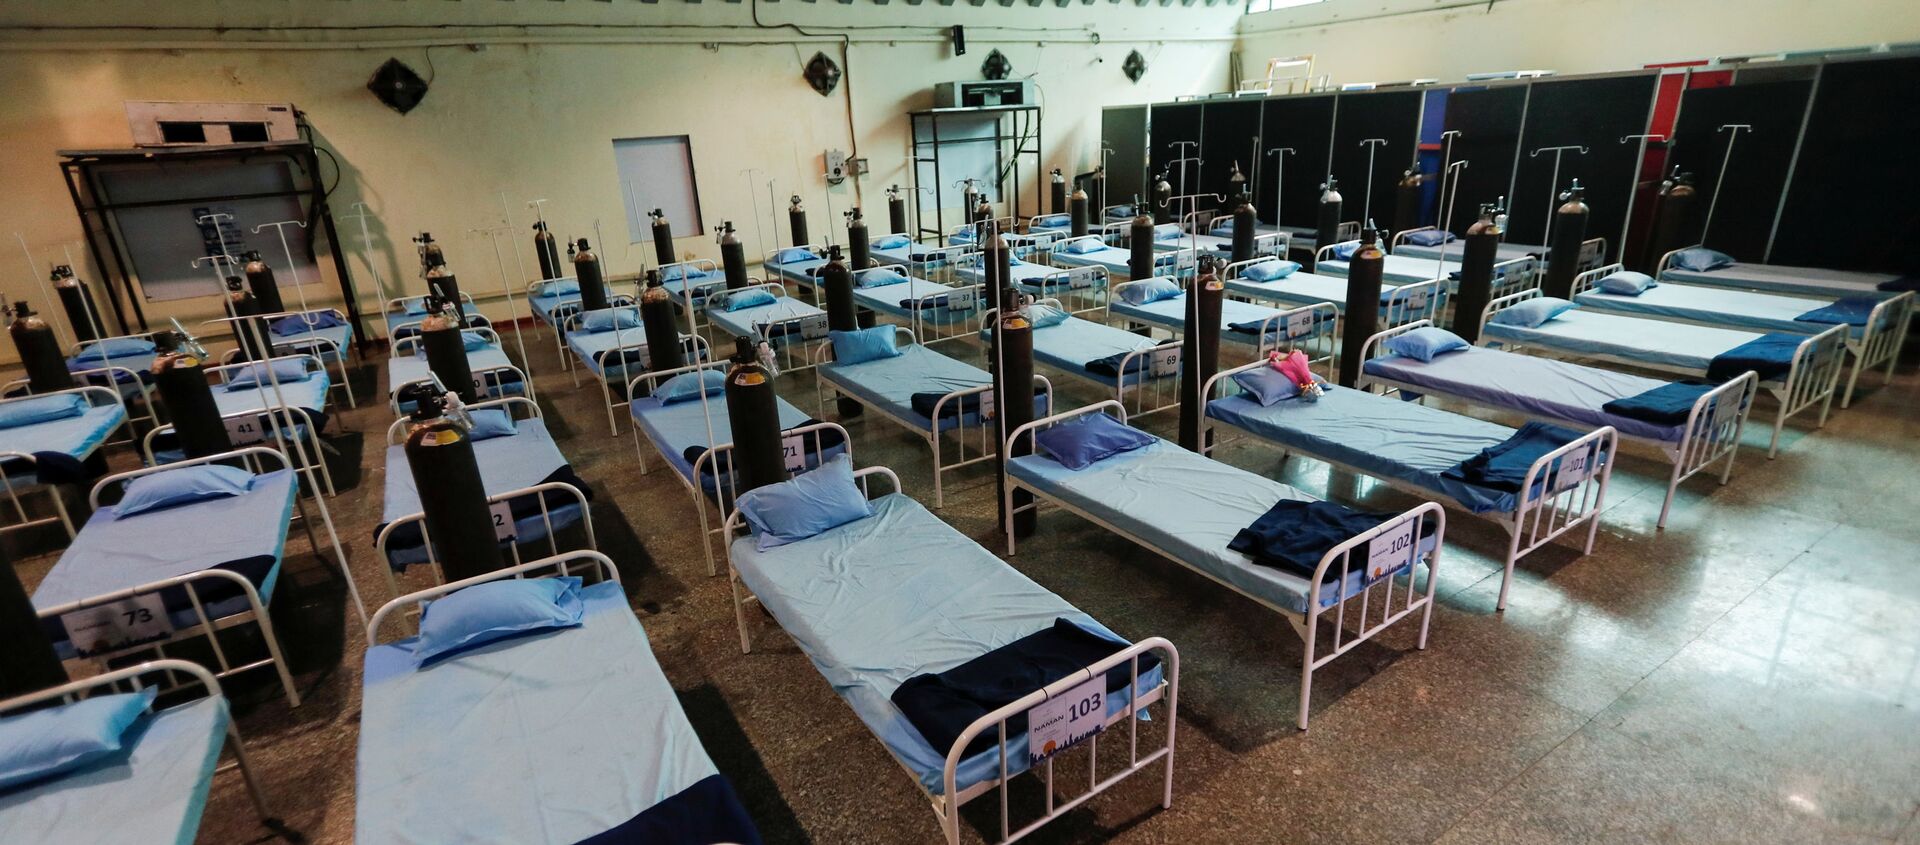 Beds with oxygen support are seen at a recently constructed quarantine facility for patients diagnosed with the coronavirus disease (COVID-19), in Mumbai, India, April 13, 2021 - Sputnik International, 1920, 25.04.2021